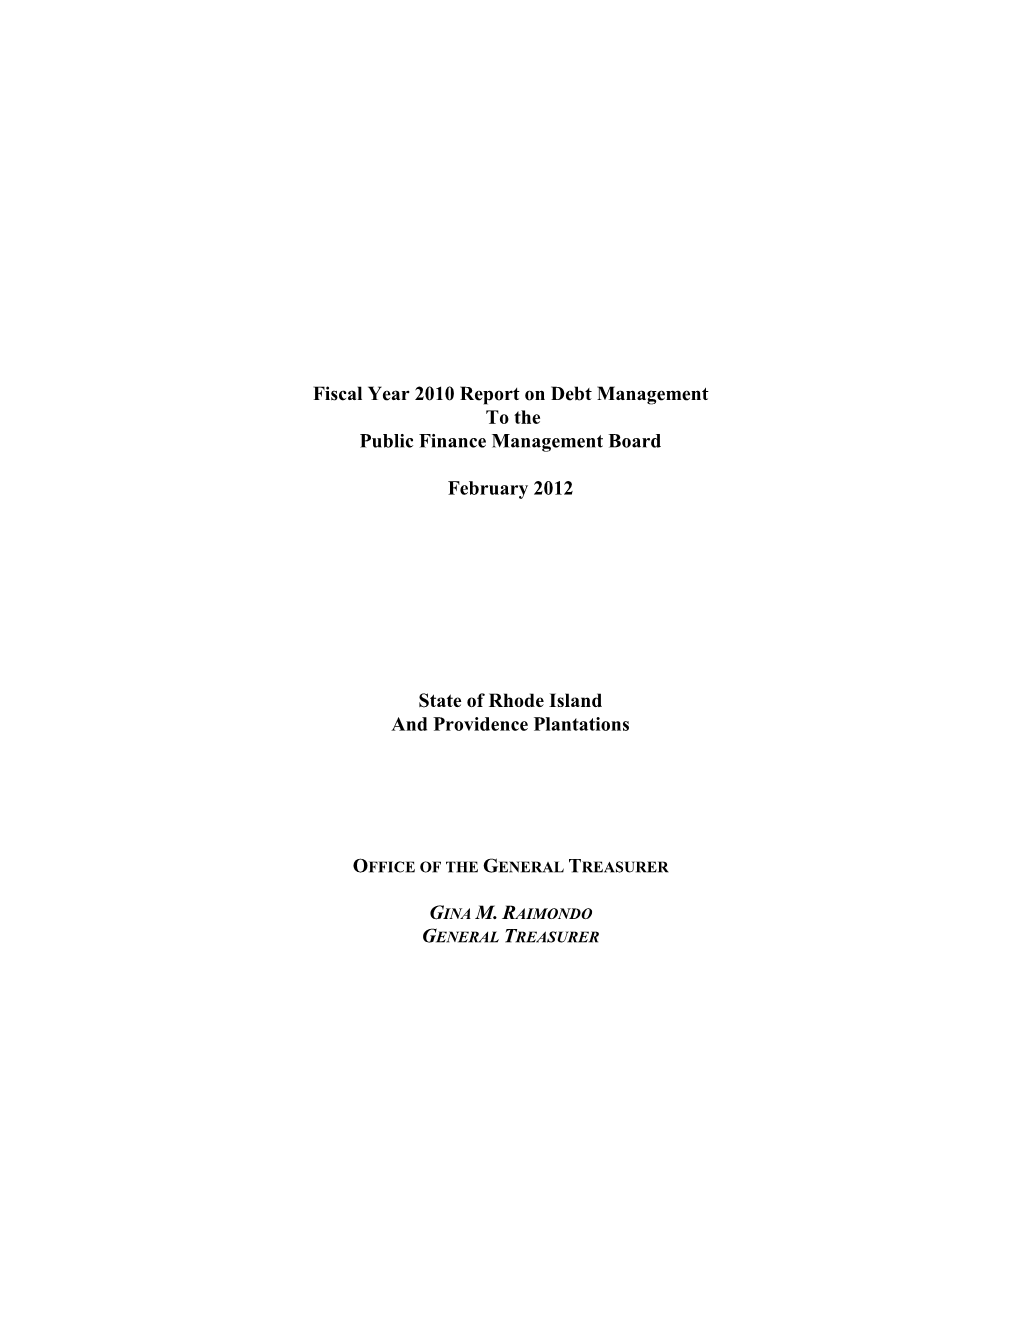 Report on Debt Management to the Public Finance Management Board